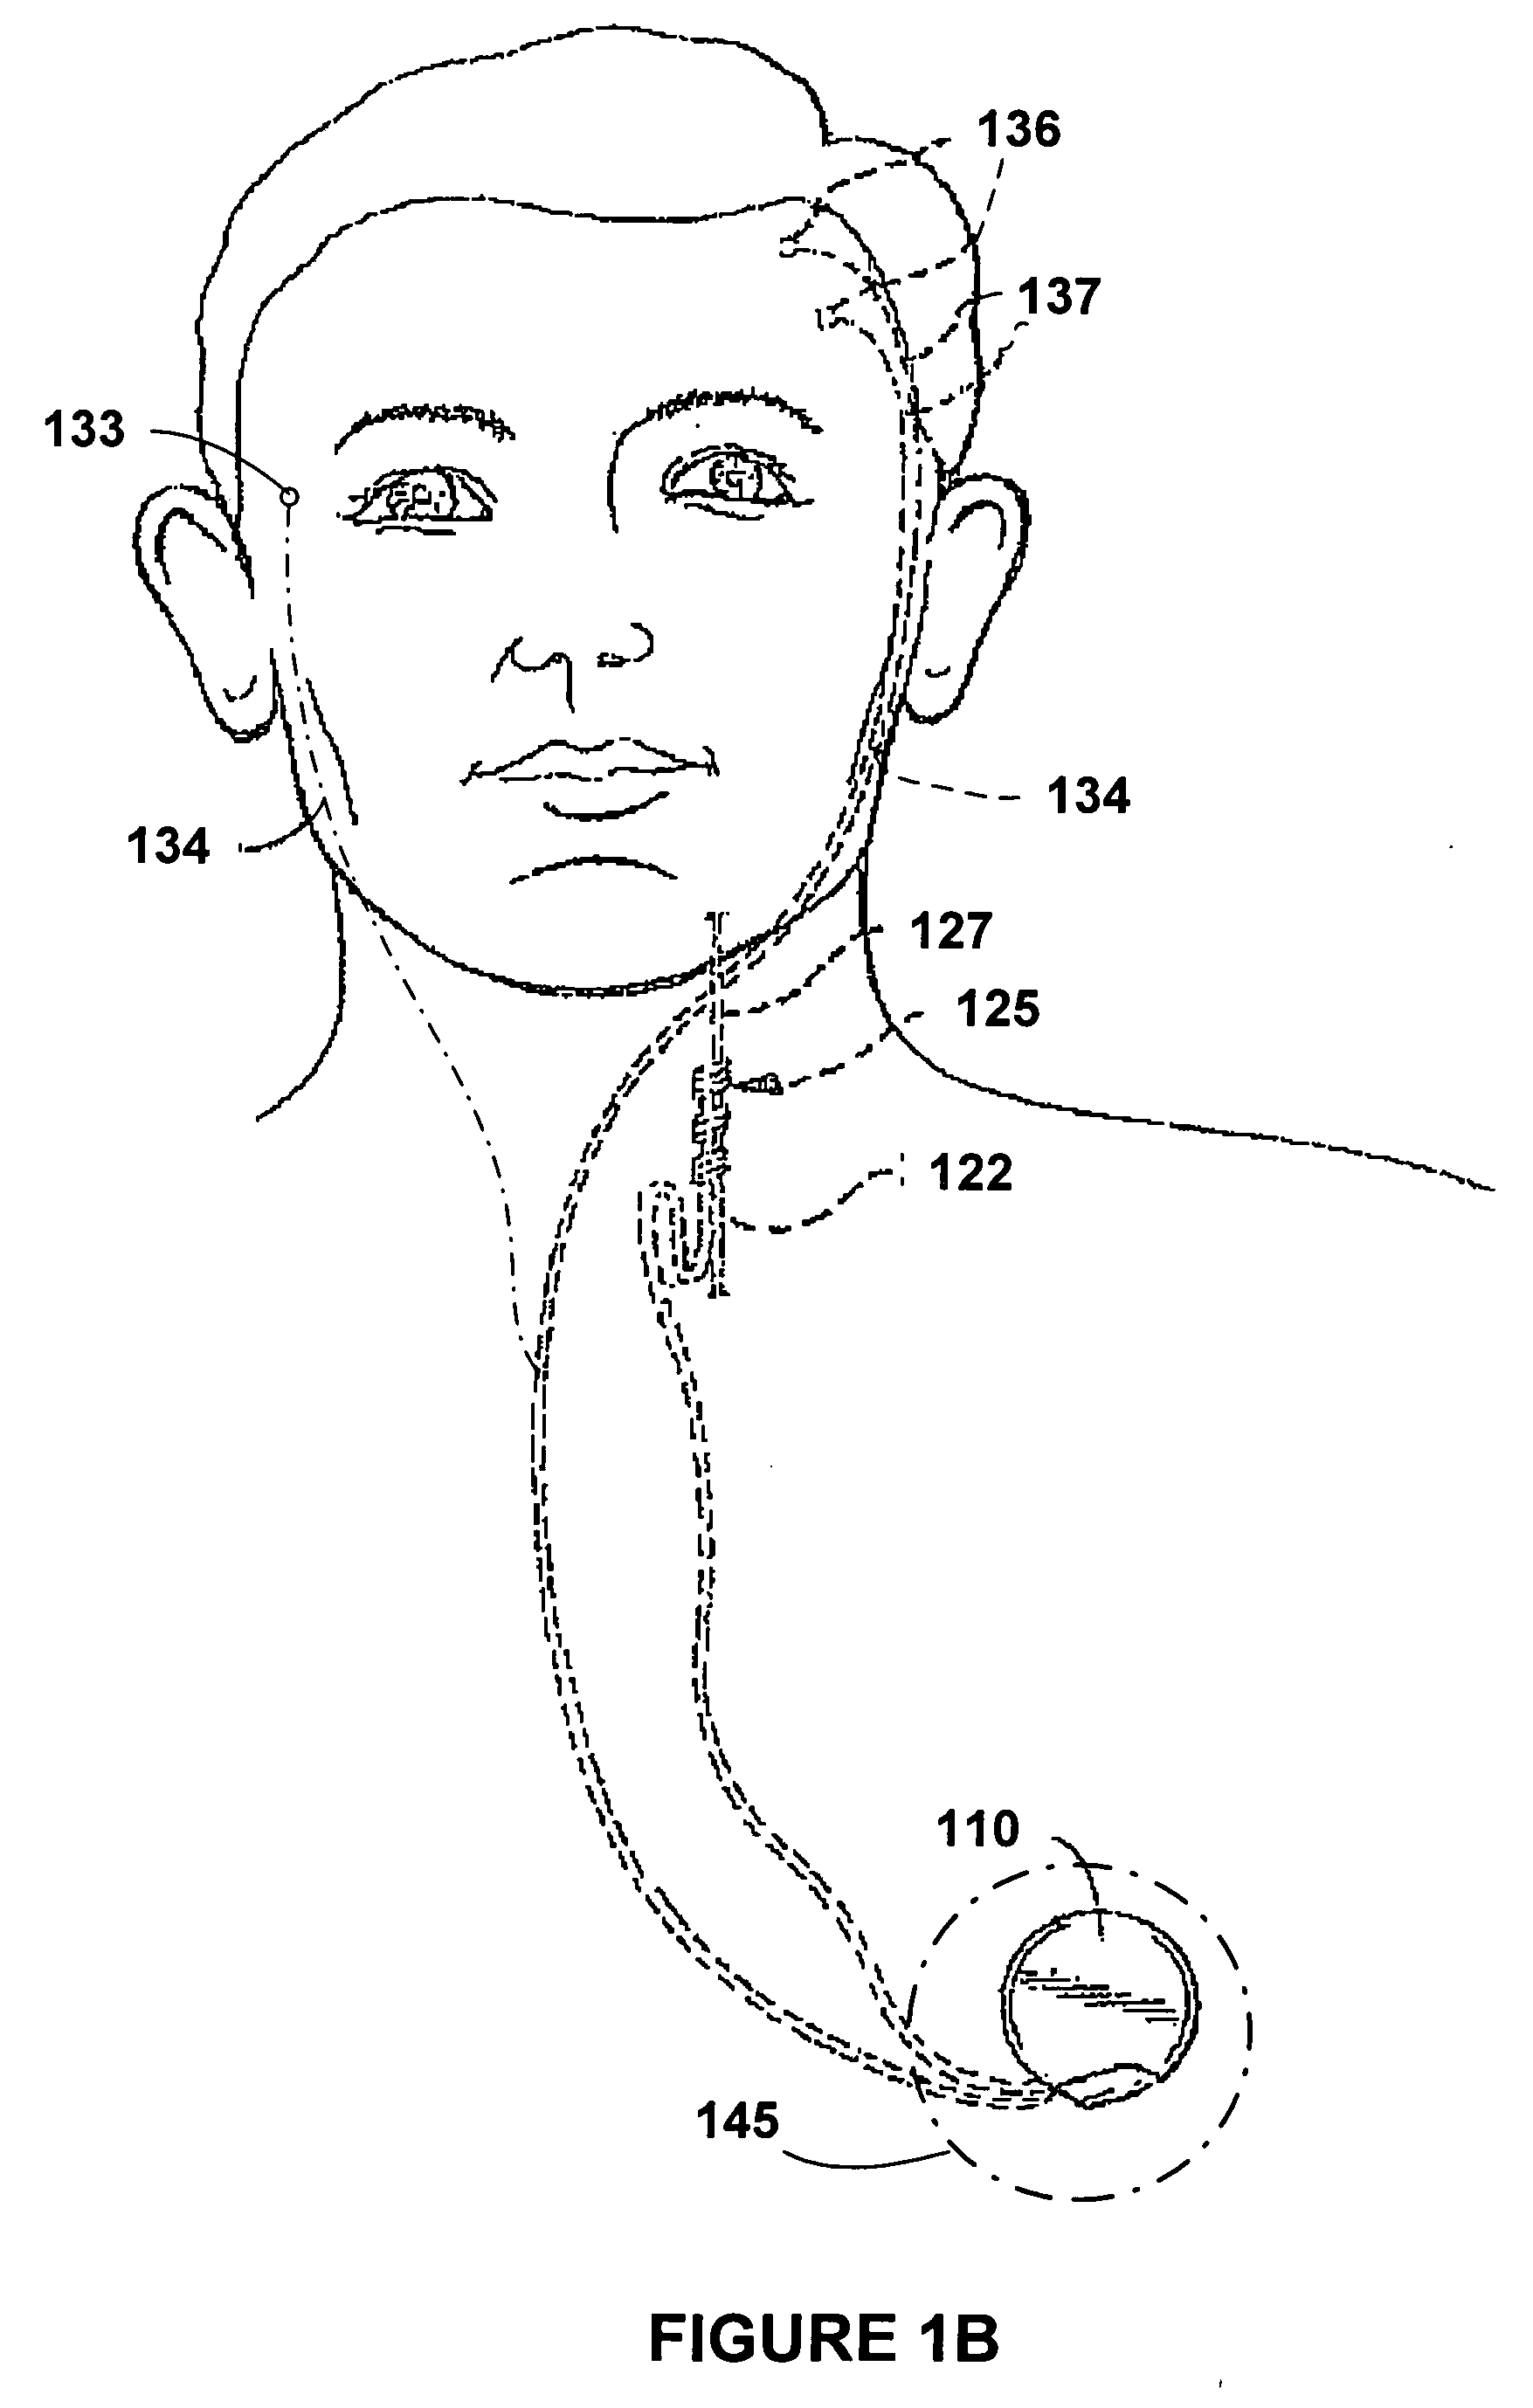 Variable output ramping for an implantable medical device